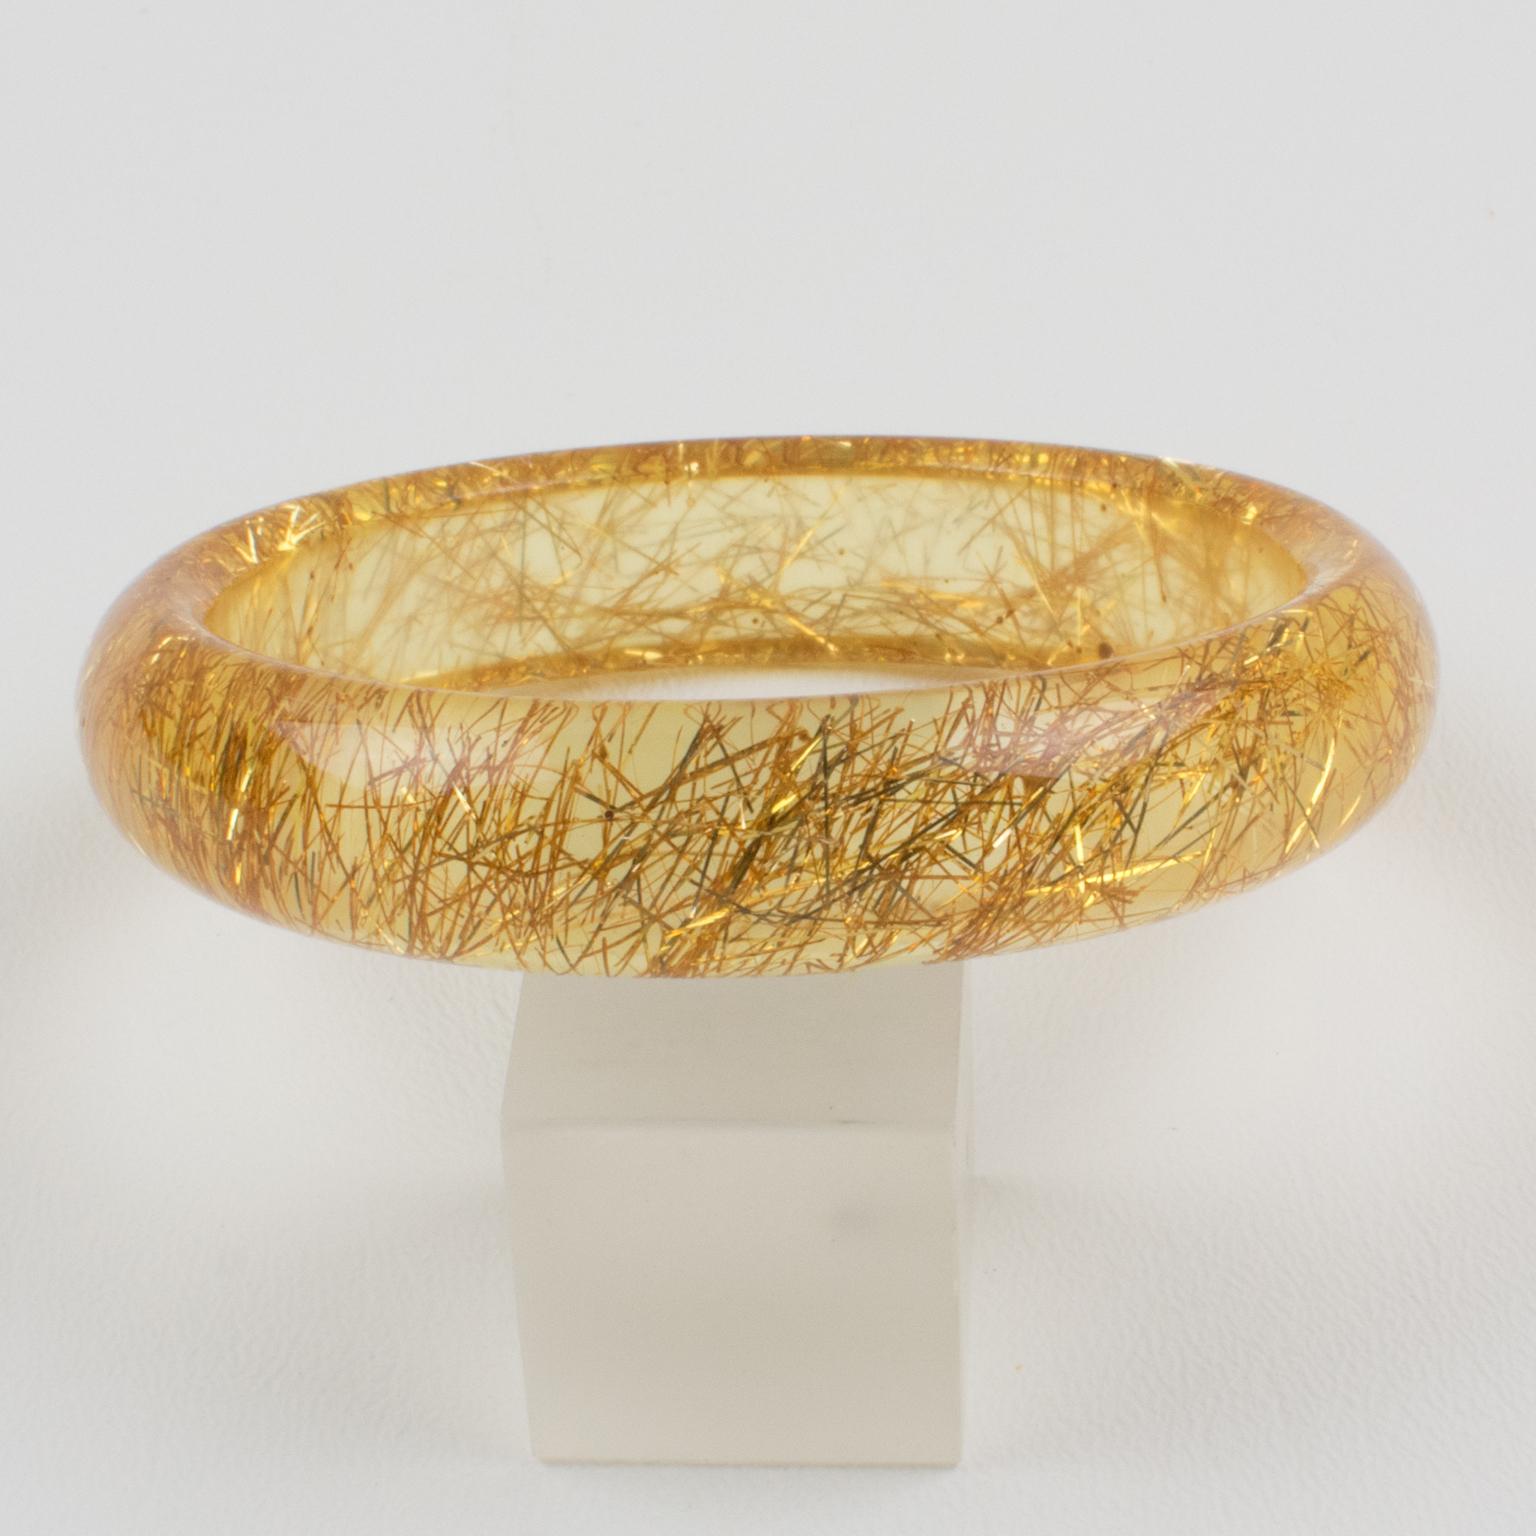 Lovely Lucite bracelet bangle. The bangle has a domed shape and is comprised of transparent yellow Lucite which is injected with metallic thread inclusions in gold color over a frosted background. The metallic threads sparkle as those of Christmas